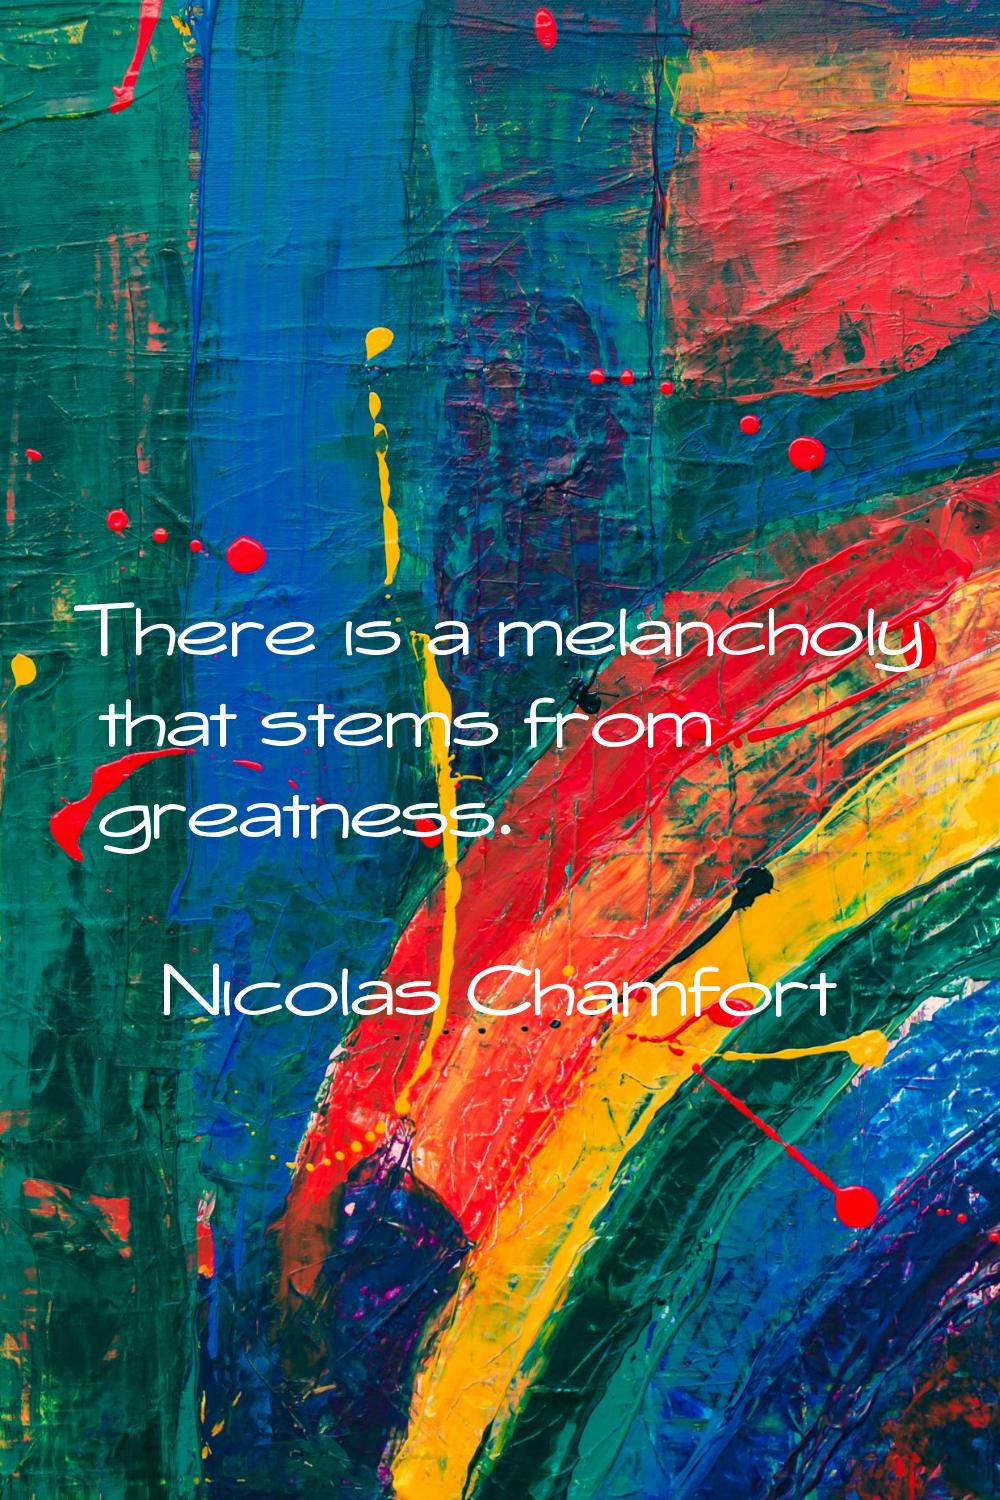 There is a melancholy that stems from greatness.